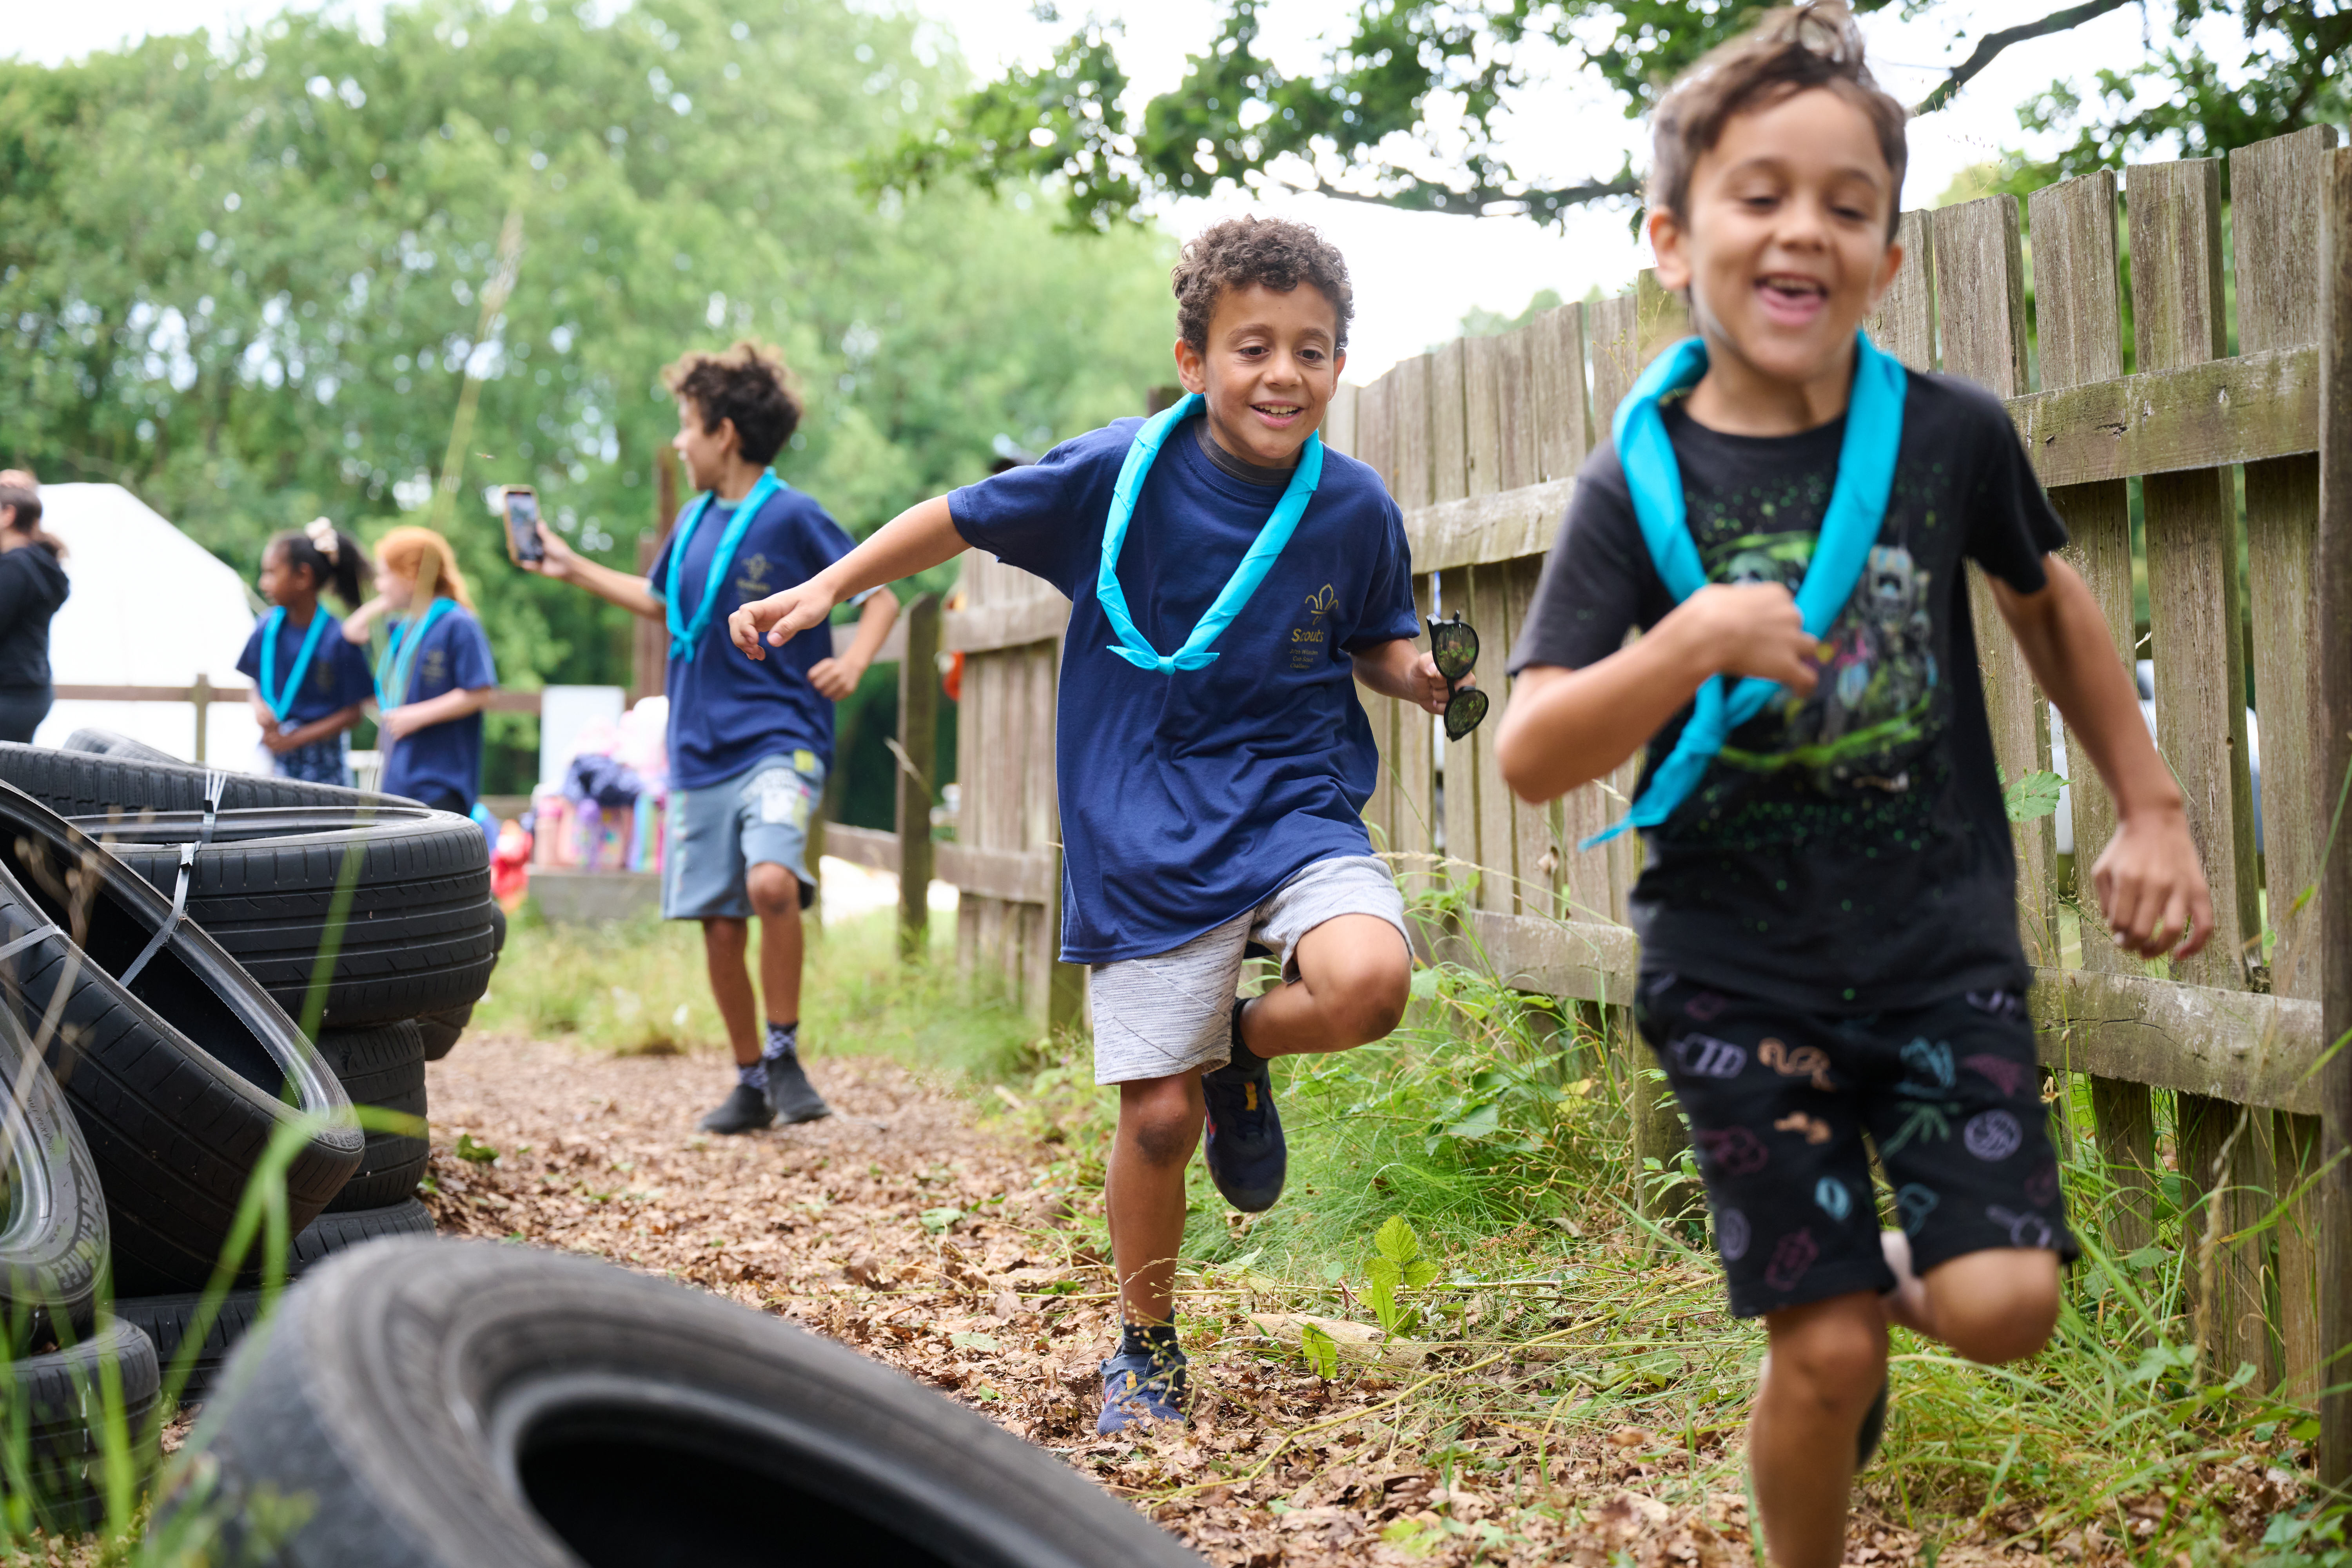 Two Cub Scouts are wearing light blue neckers and running outside with a brown fence to their left. On their right are old tyres on the ground, and they're both wearing t-shirts and shorts. They're looking at the ground and smiling as they run.